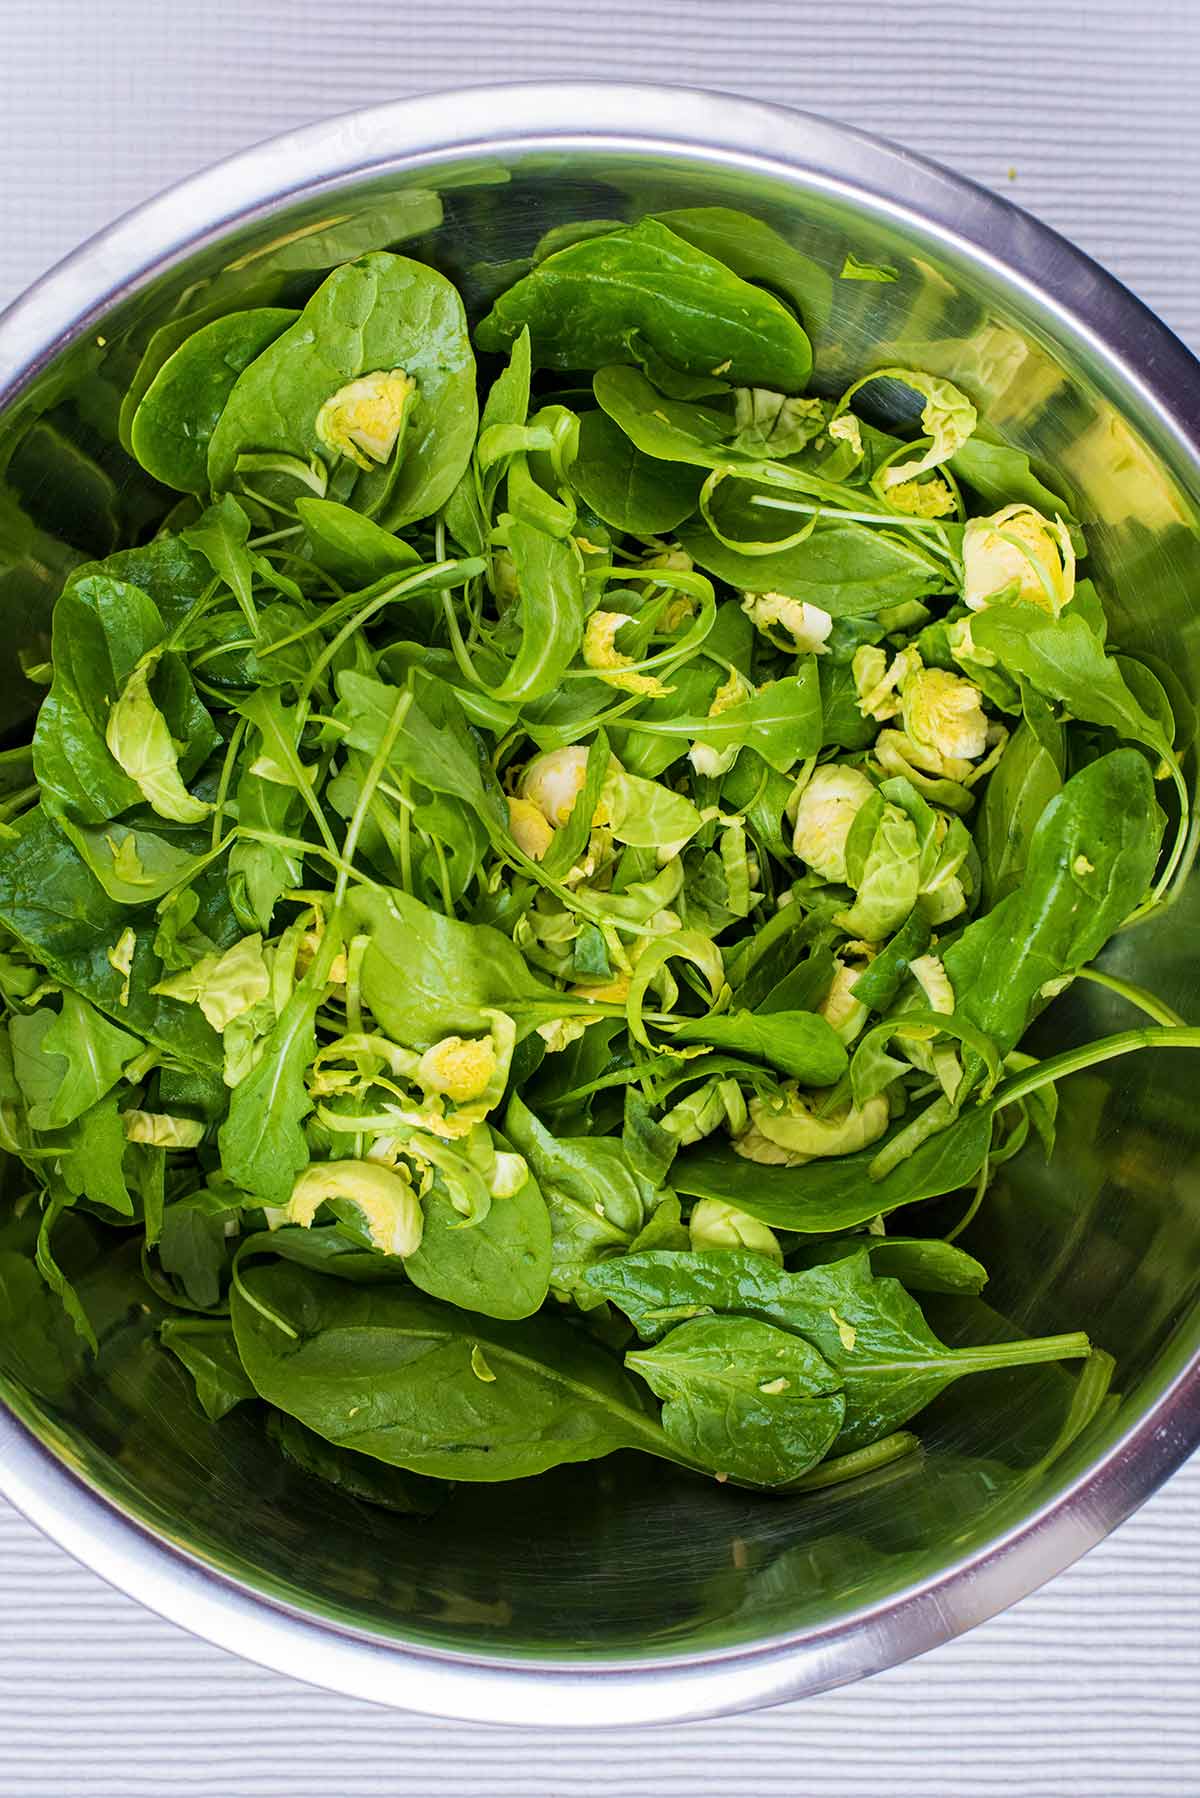 A large metal bowl containing salad leaves.